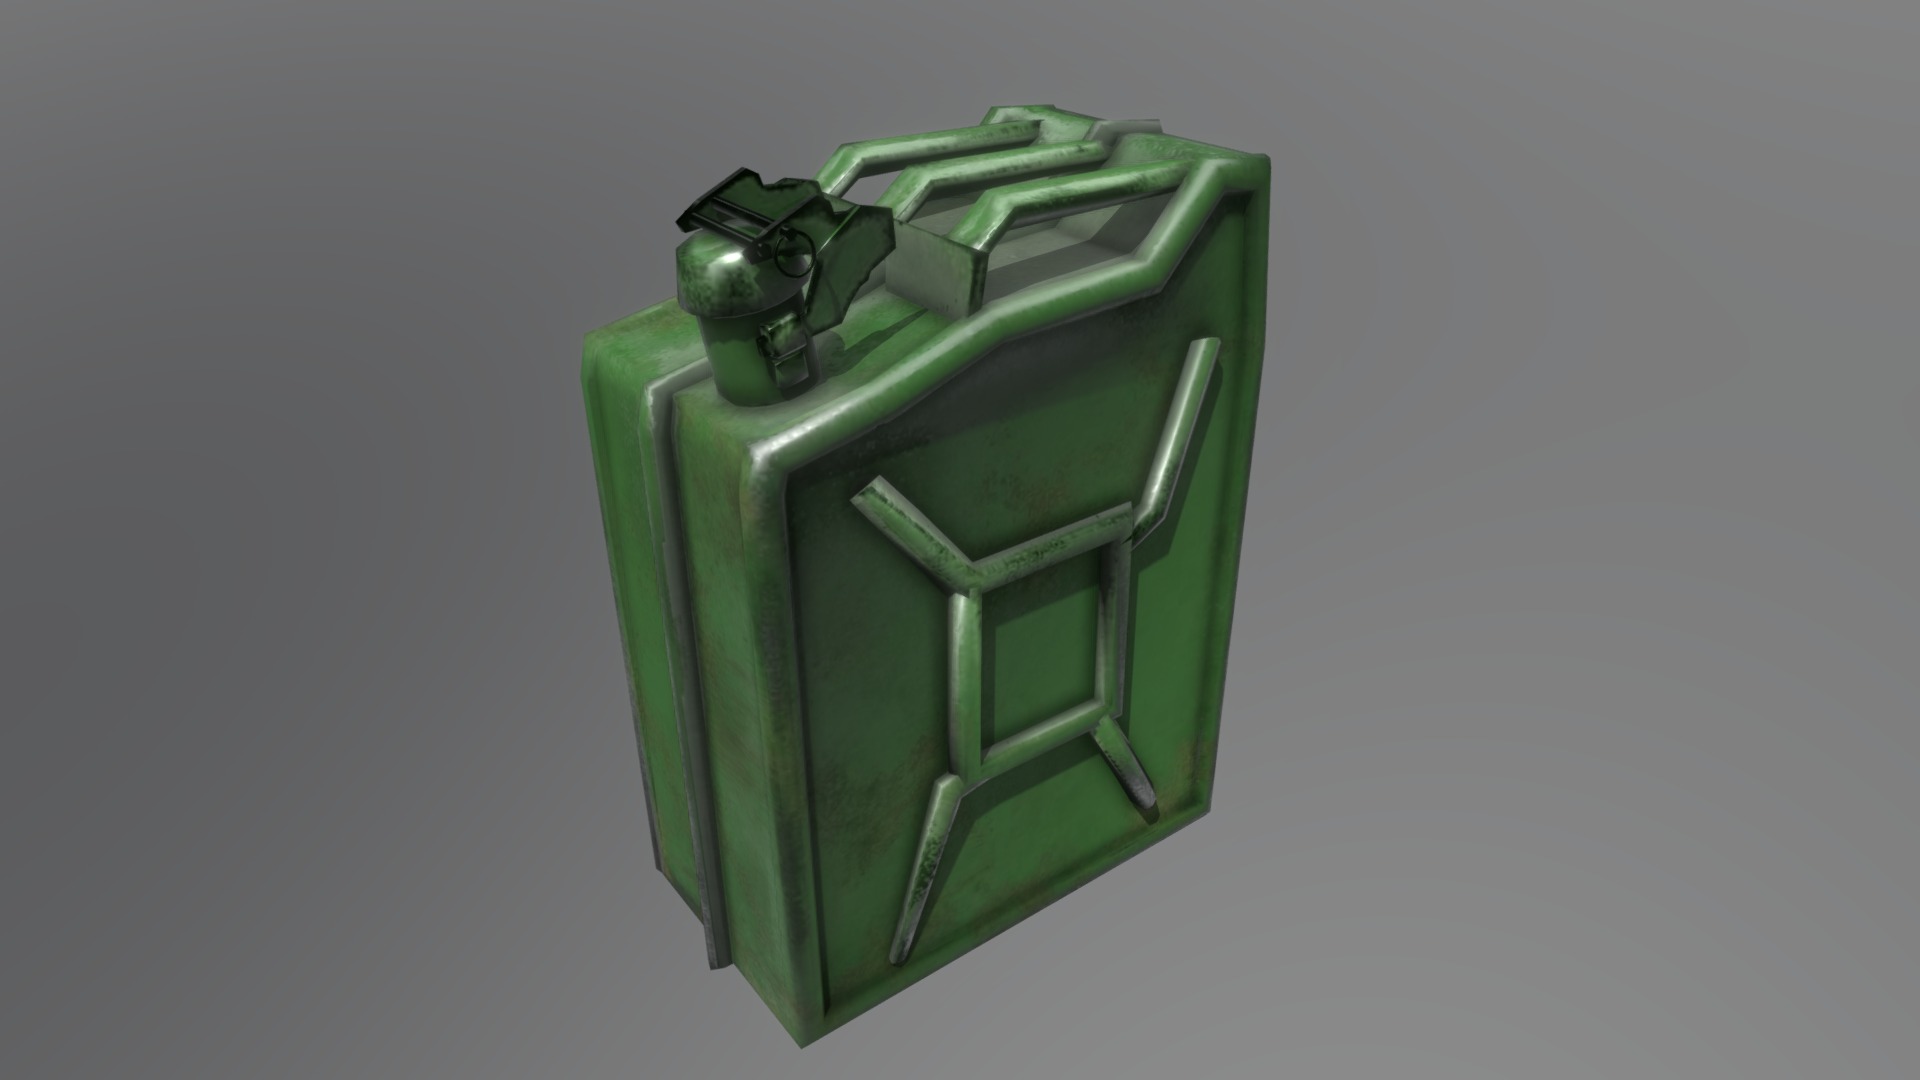 3D model Commercial – Jerrycan - This is a 3D model of the Commercial - Jerrycan. The 3D model is about a green toy cube.